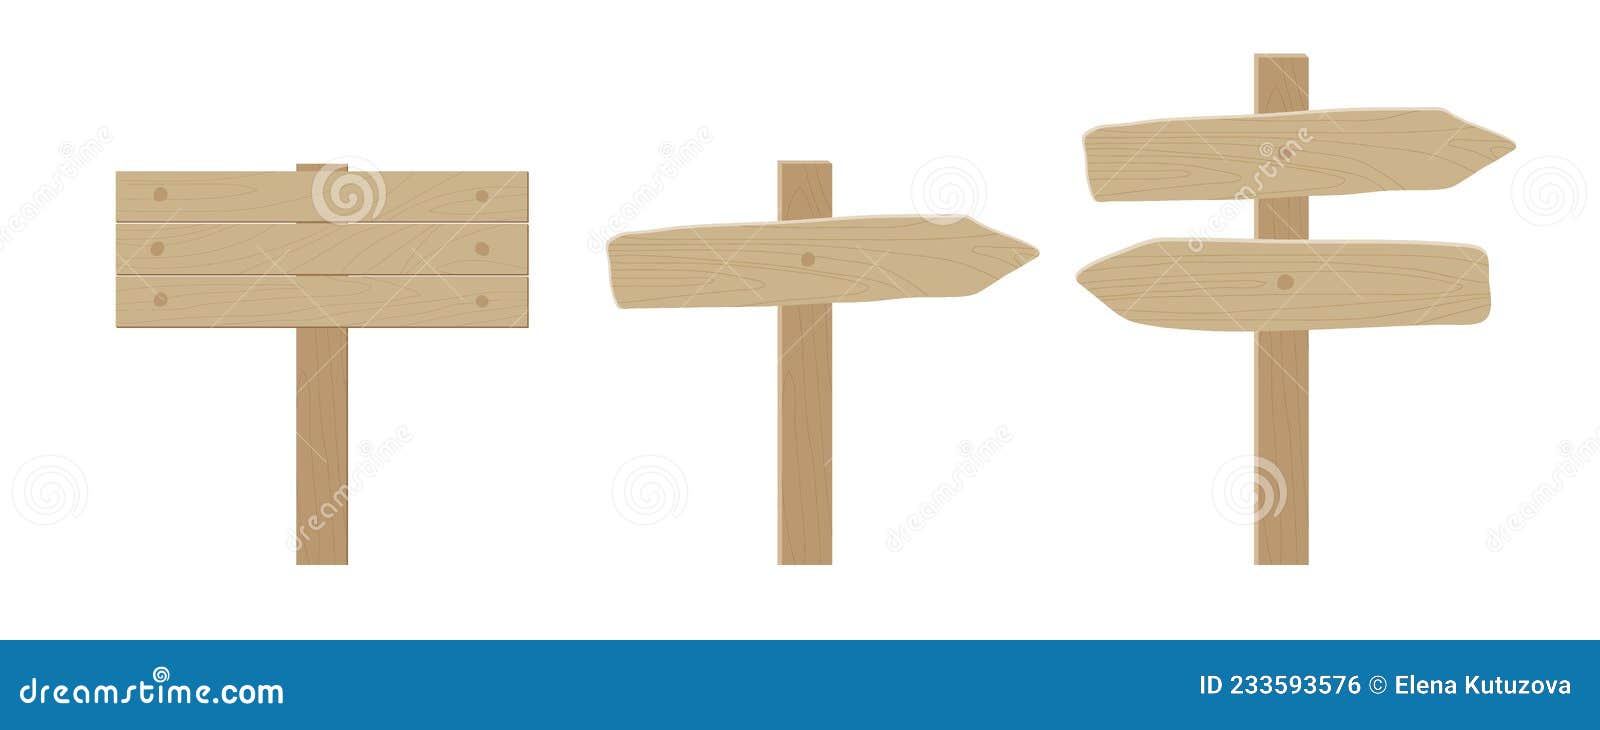 wooden-plank-signboard-set-pointers-and-arrows-signpost-with-place